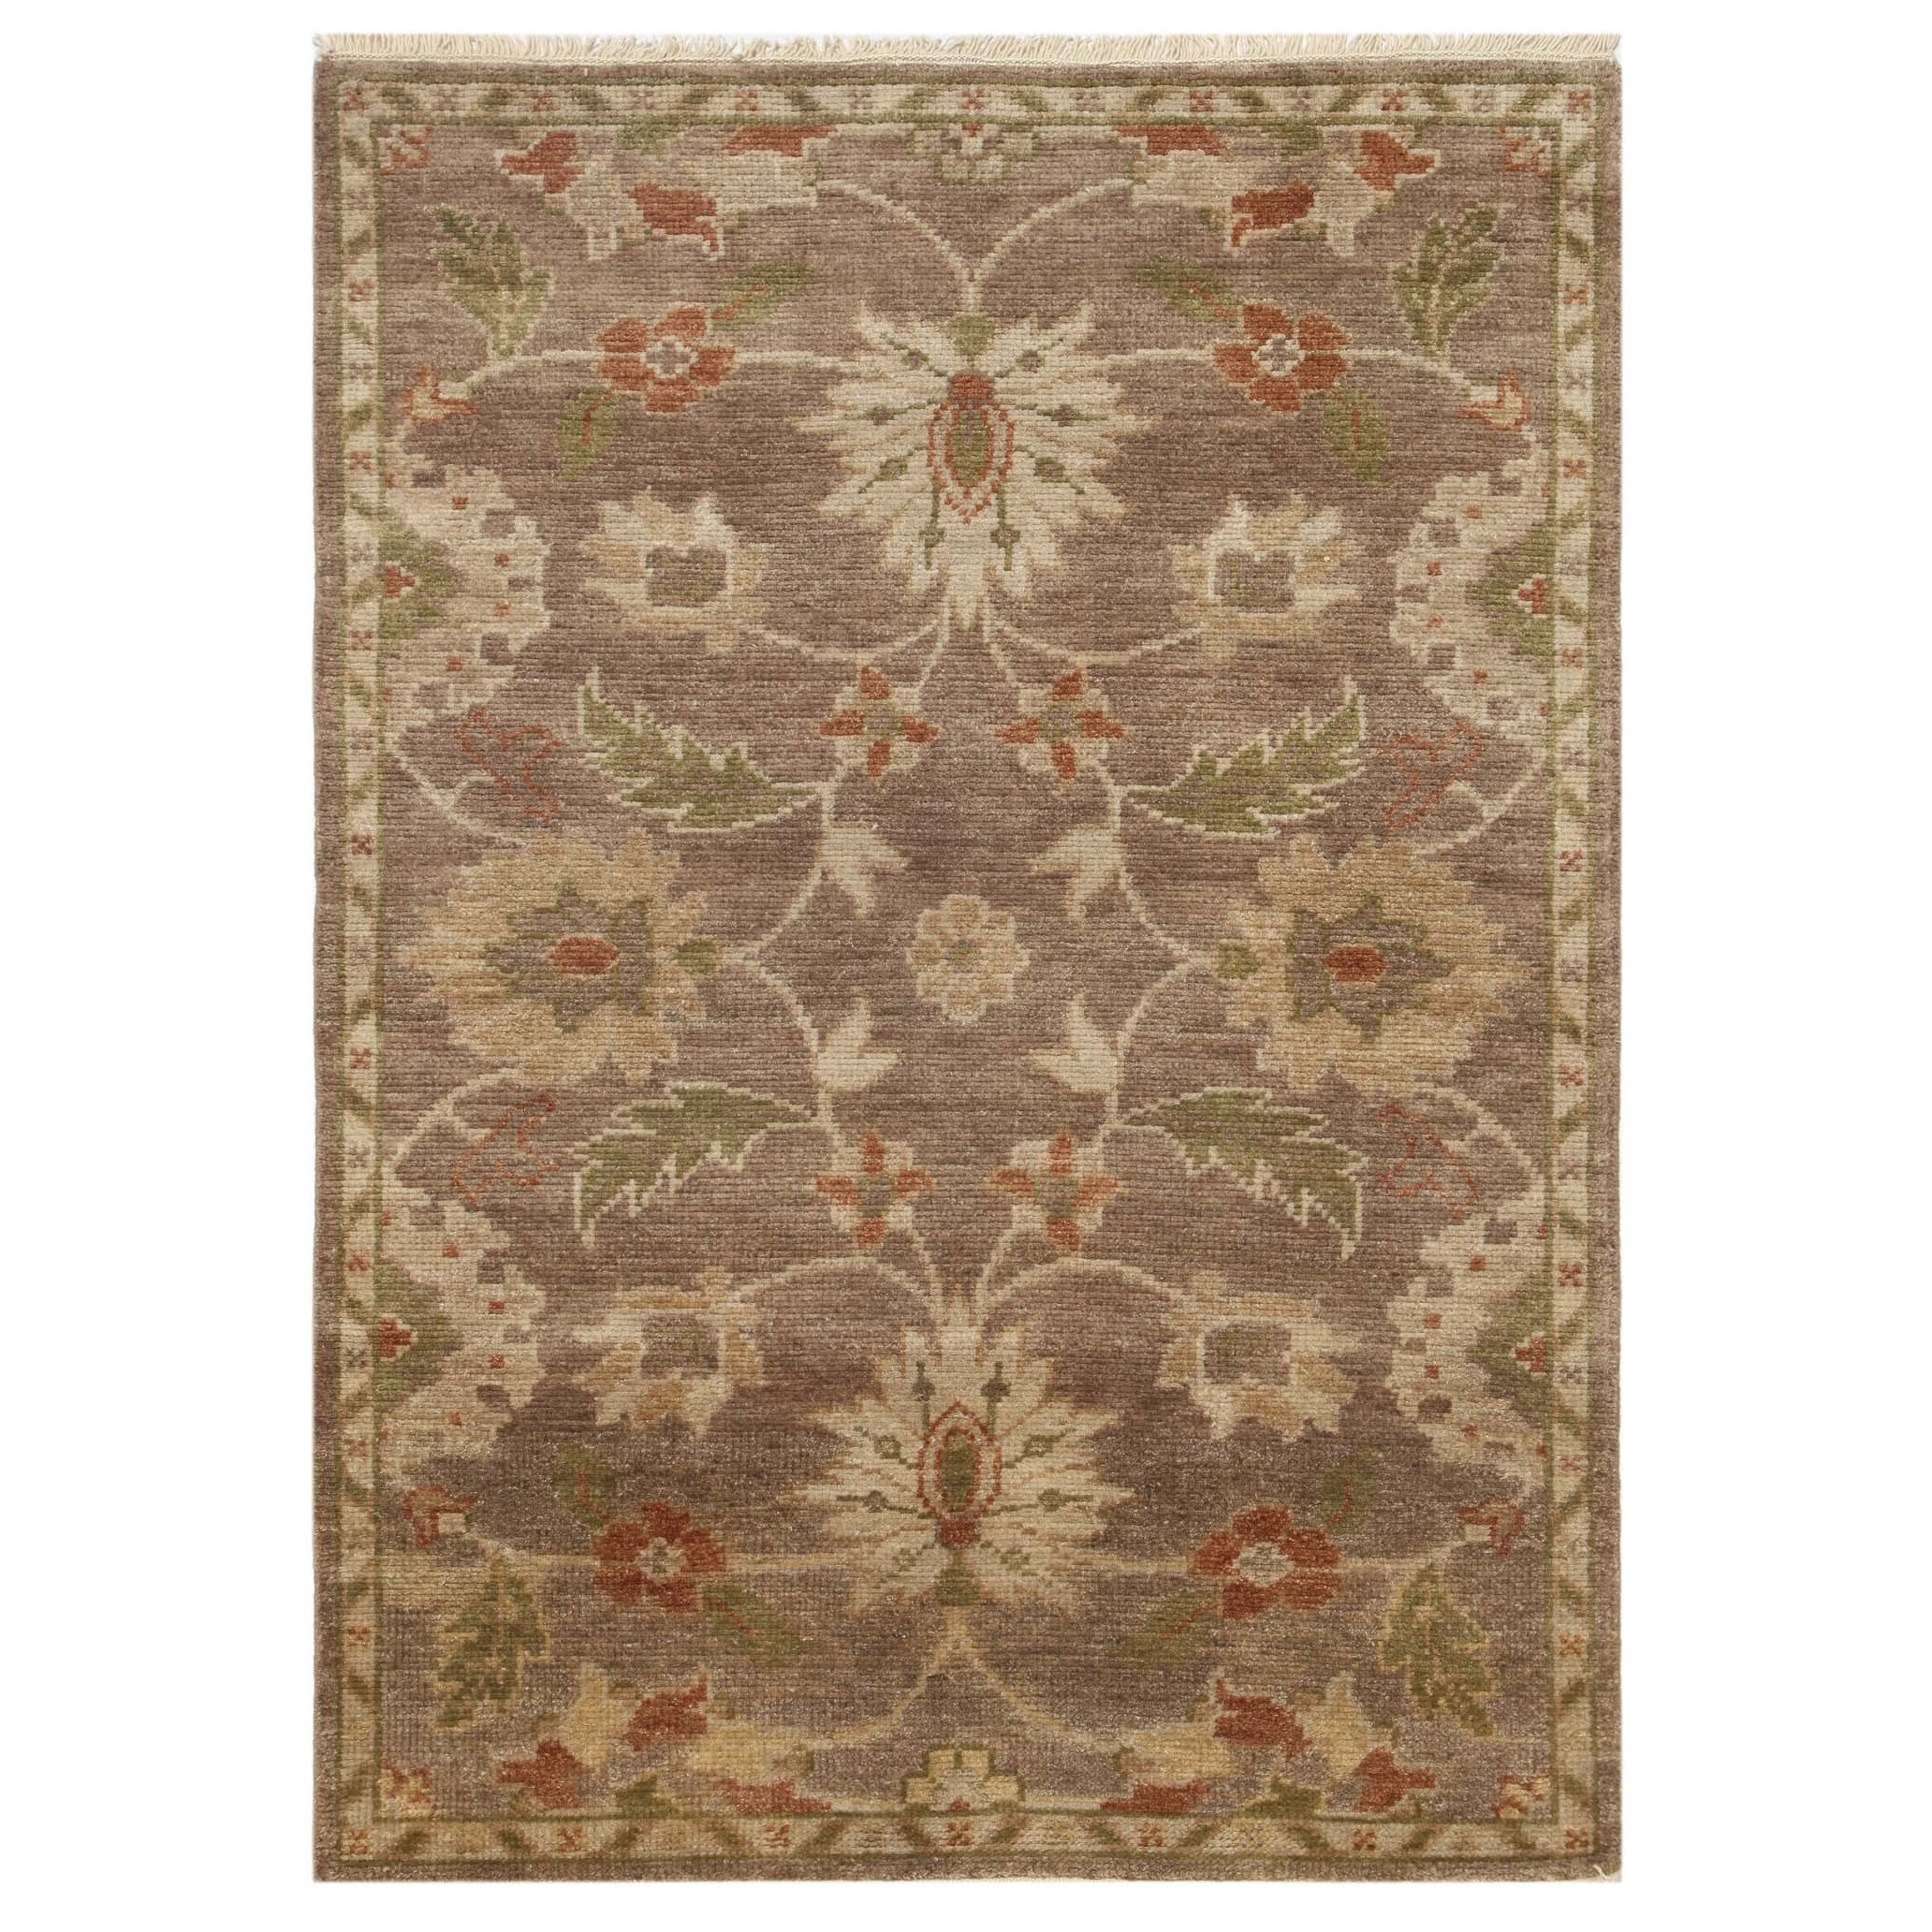 Hand knotted Beige/ Brown Floral Pattern Wool Rug (5 X 8)